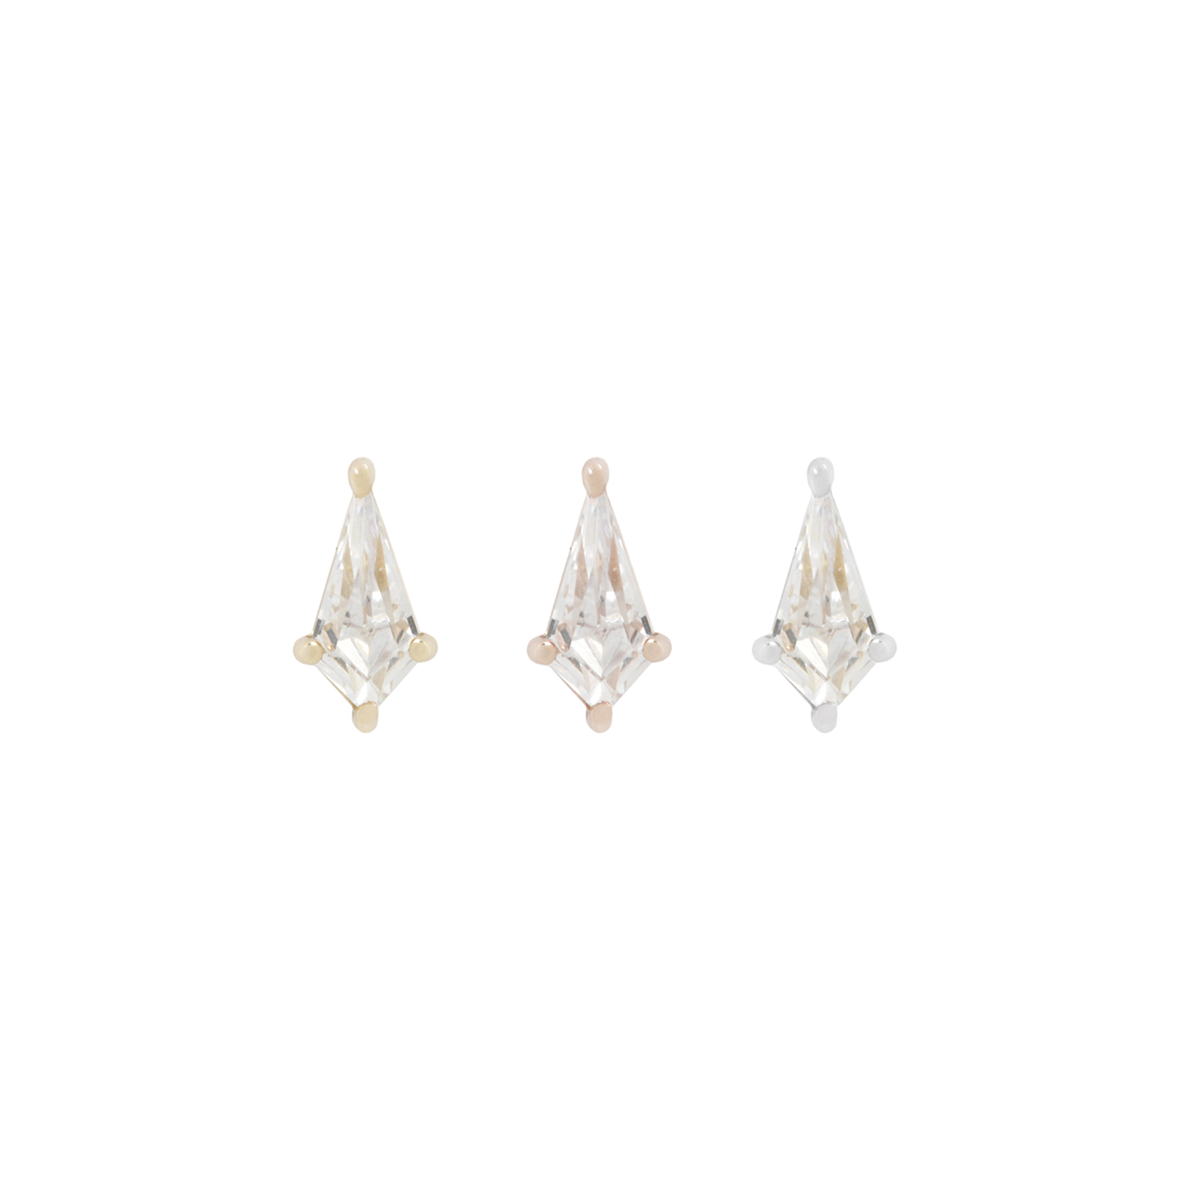 Mini Soho - Kite Cut Brilliant Swarovski Crystal Zirconias available in 14K Rose  Gold, 14K White Gold  and 14K Yellow Gold with Threadless End by Buddha Organics